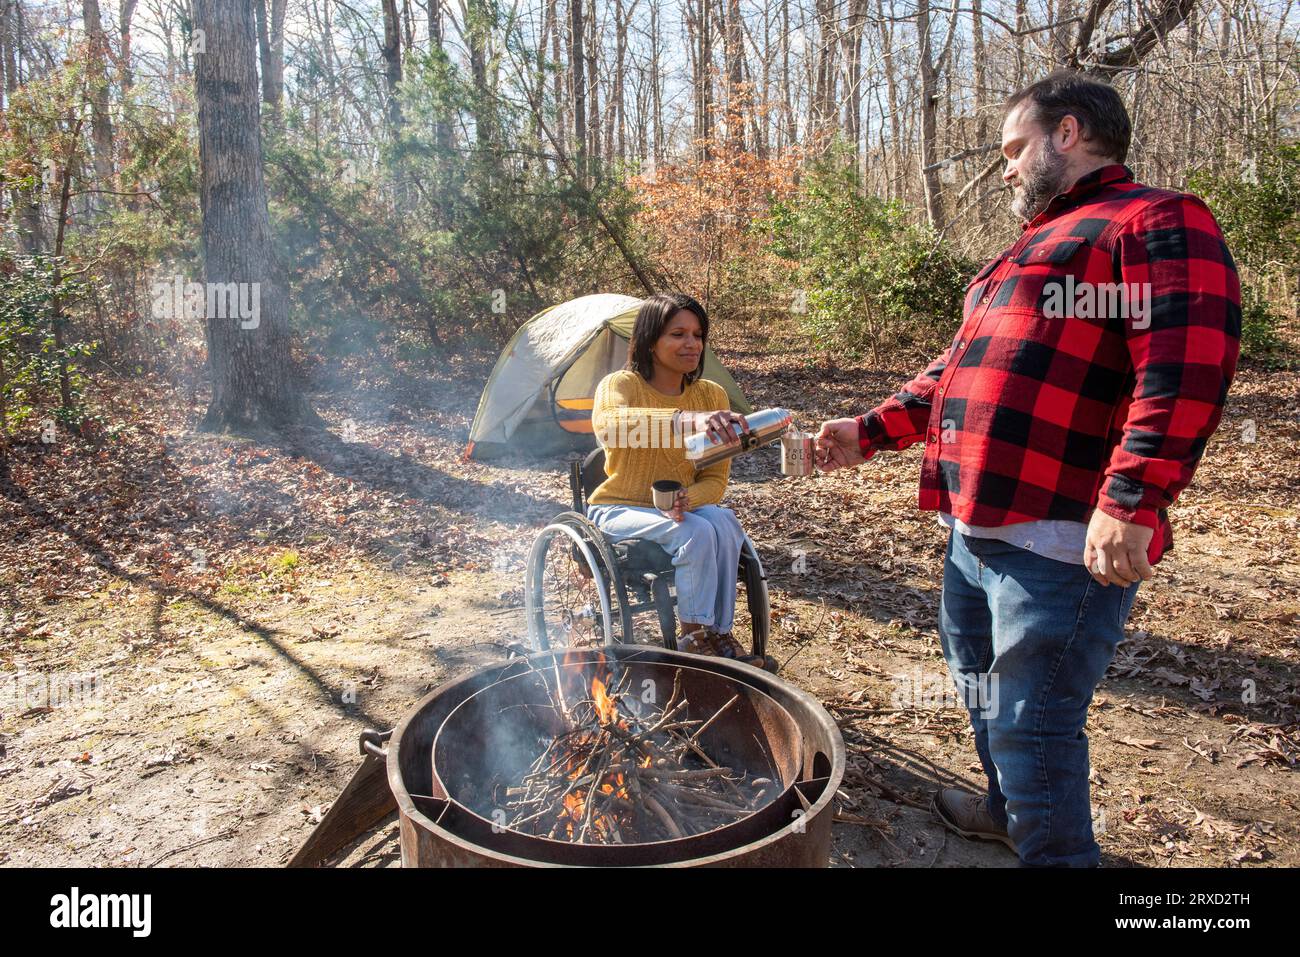 An outdoorsy couple shares a hot beverage to stay warm at their campsite. Both are disabled but love the outdoors. Stock Photo